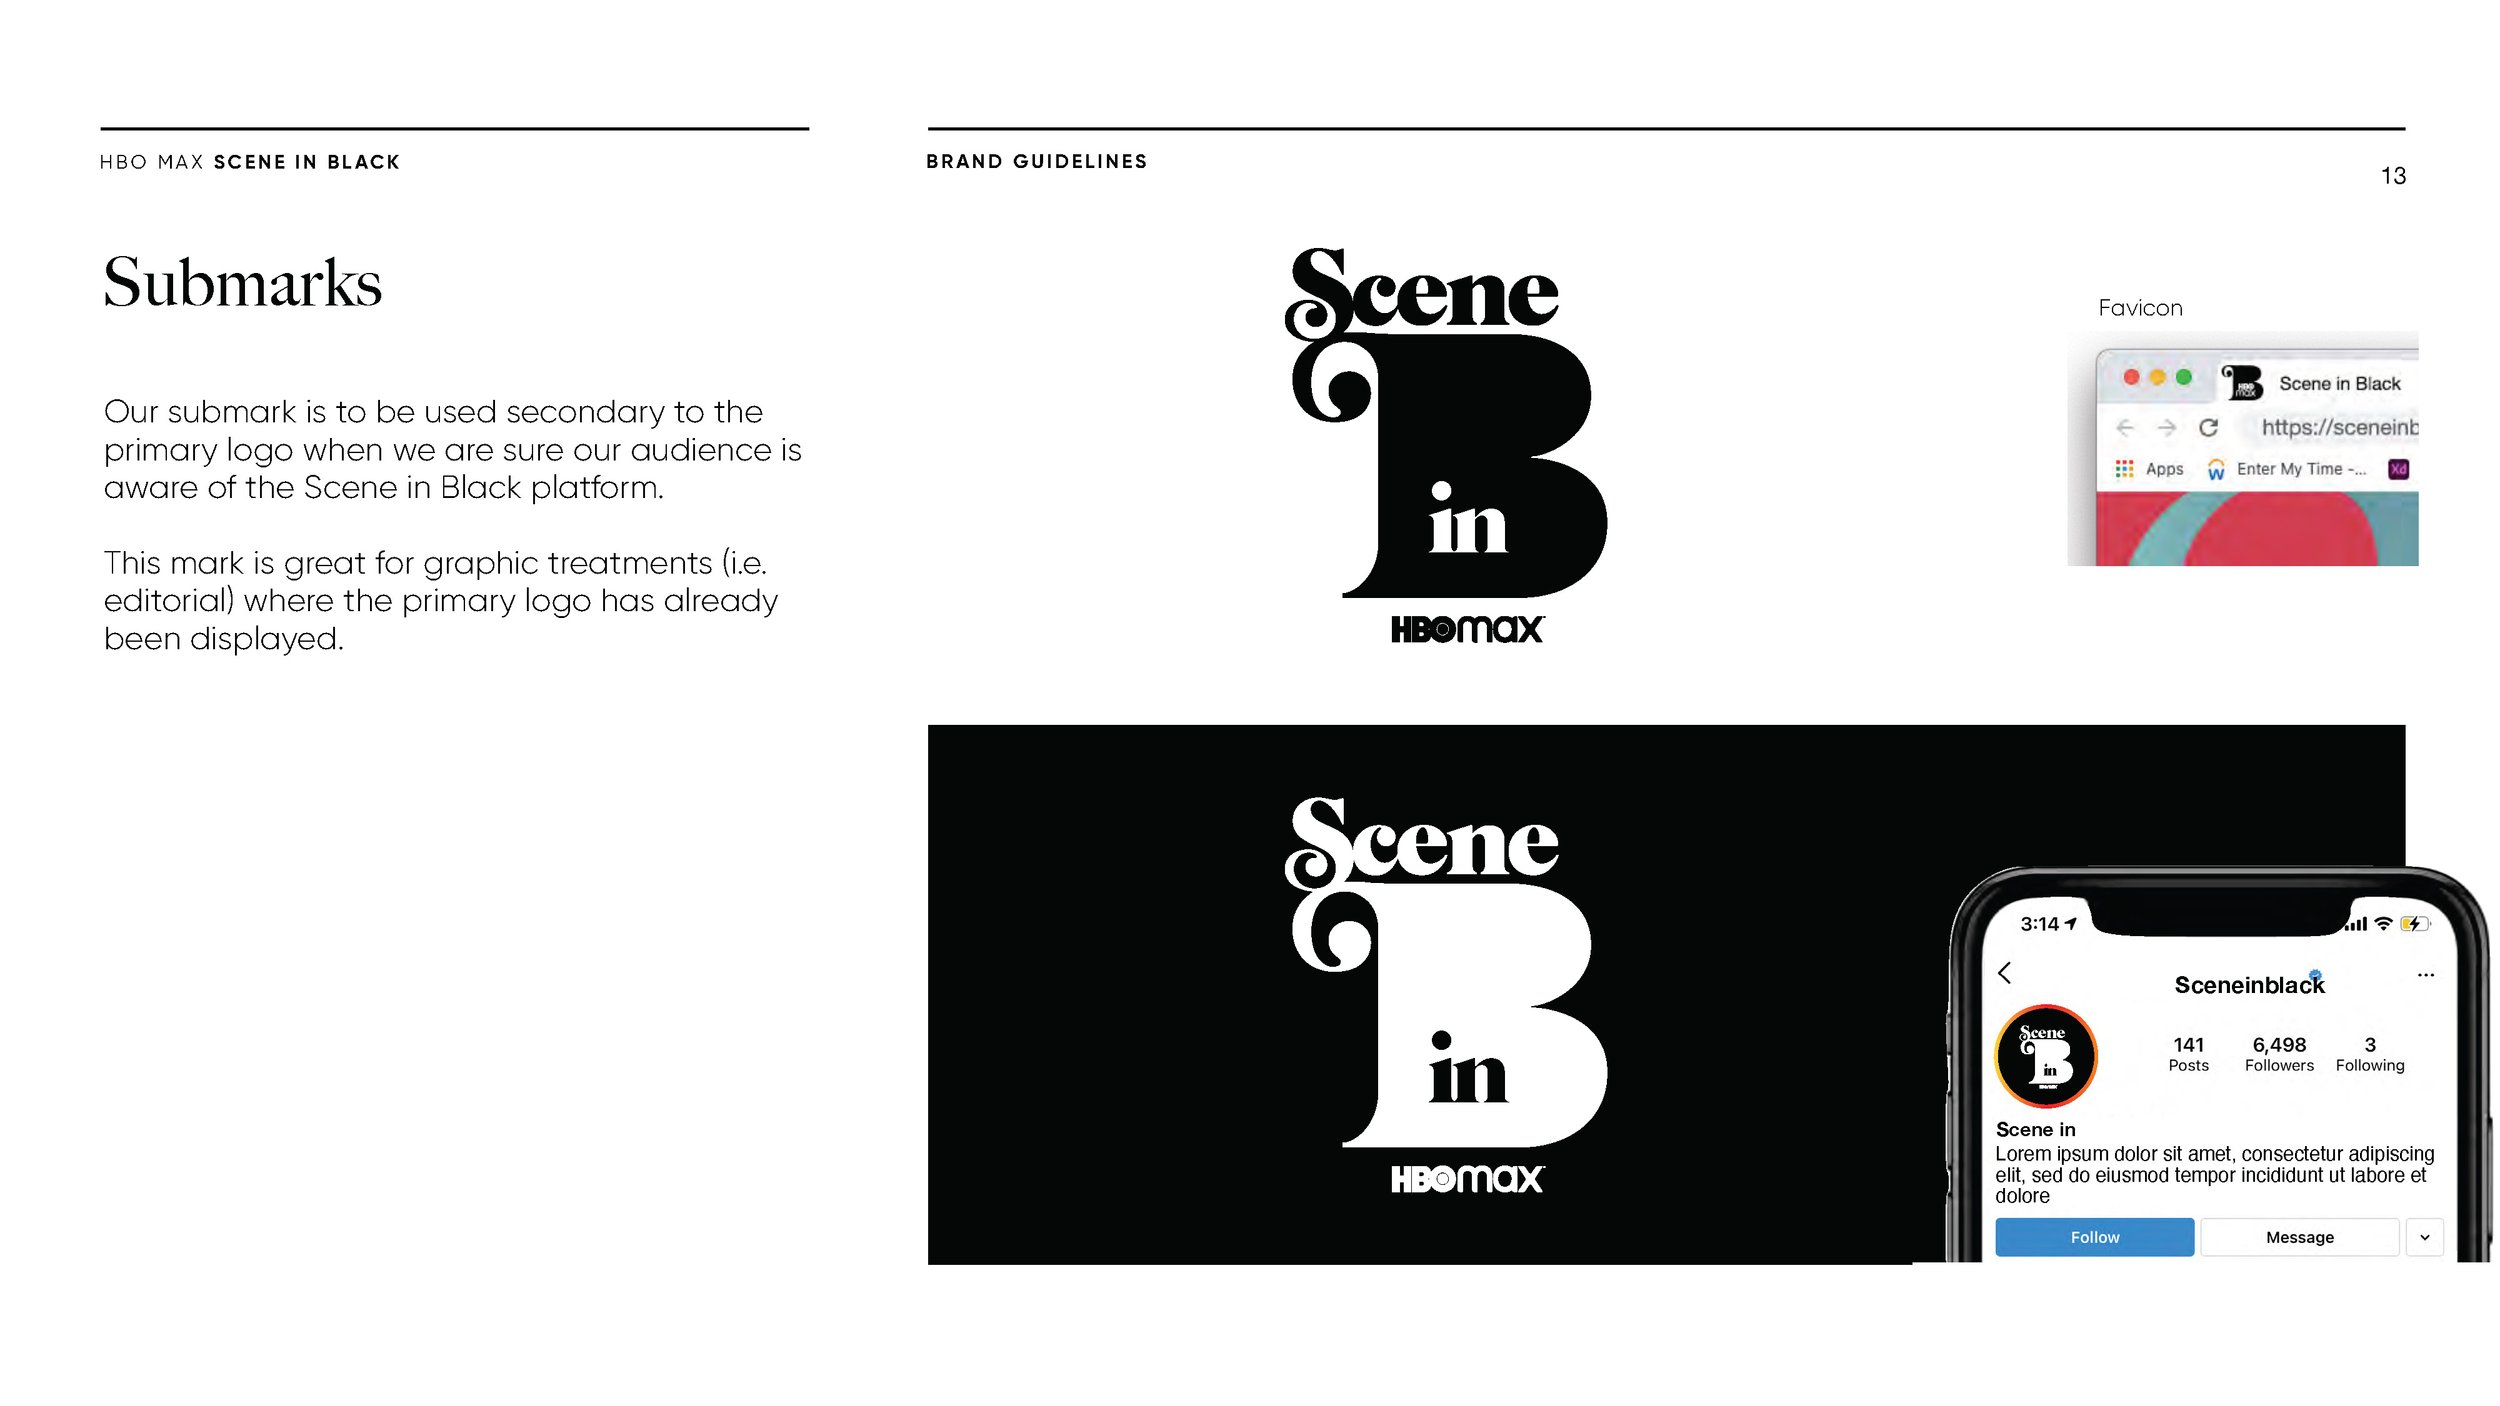 HBOMax_SceneinBlack | Brand Guidelines | Final Oct21_Page_13.jpg